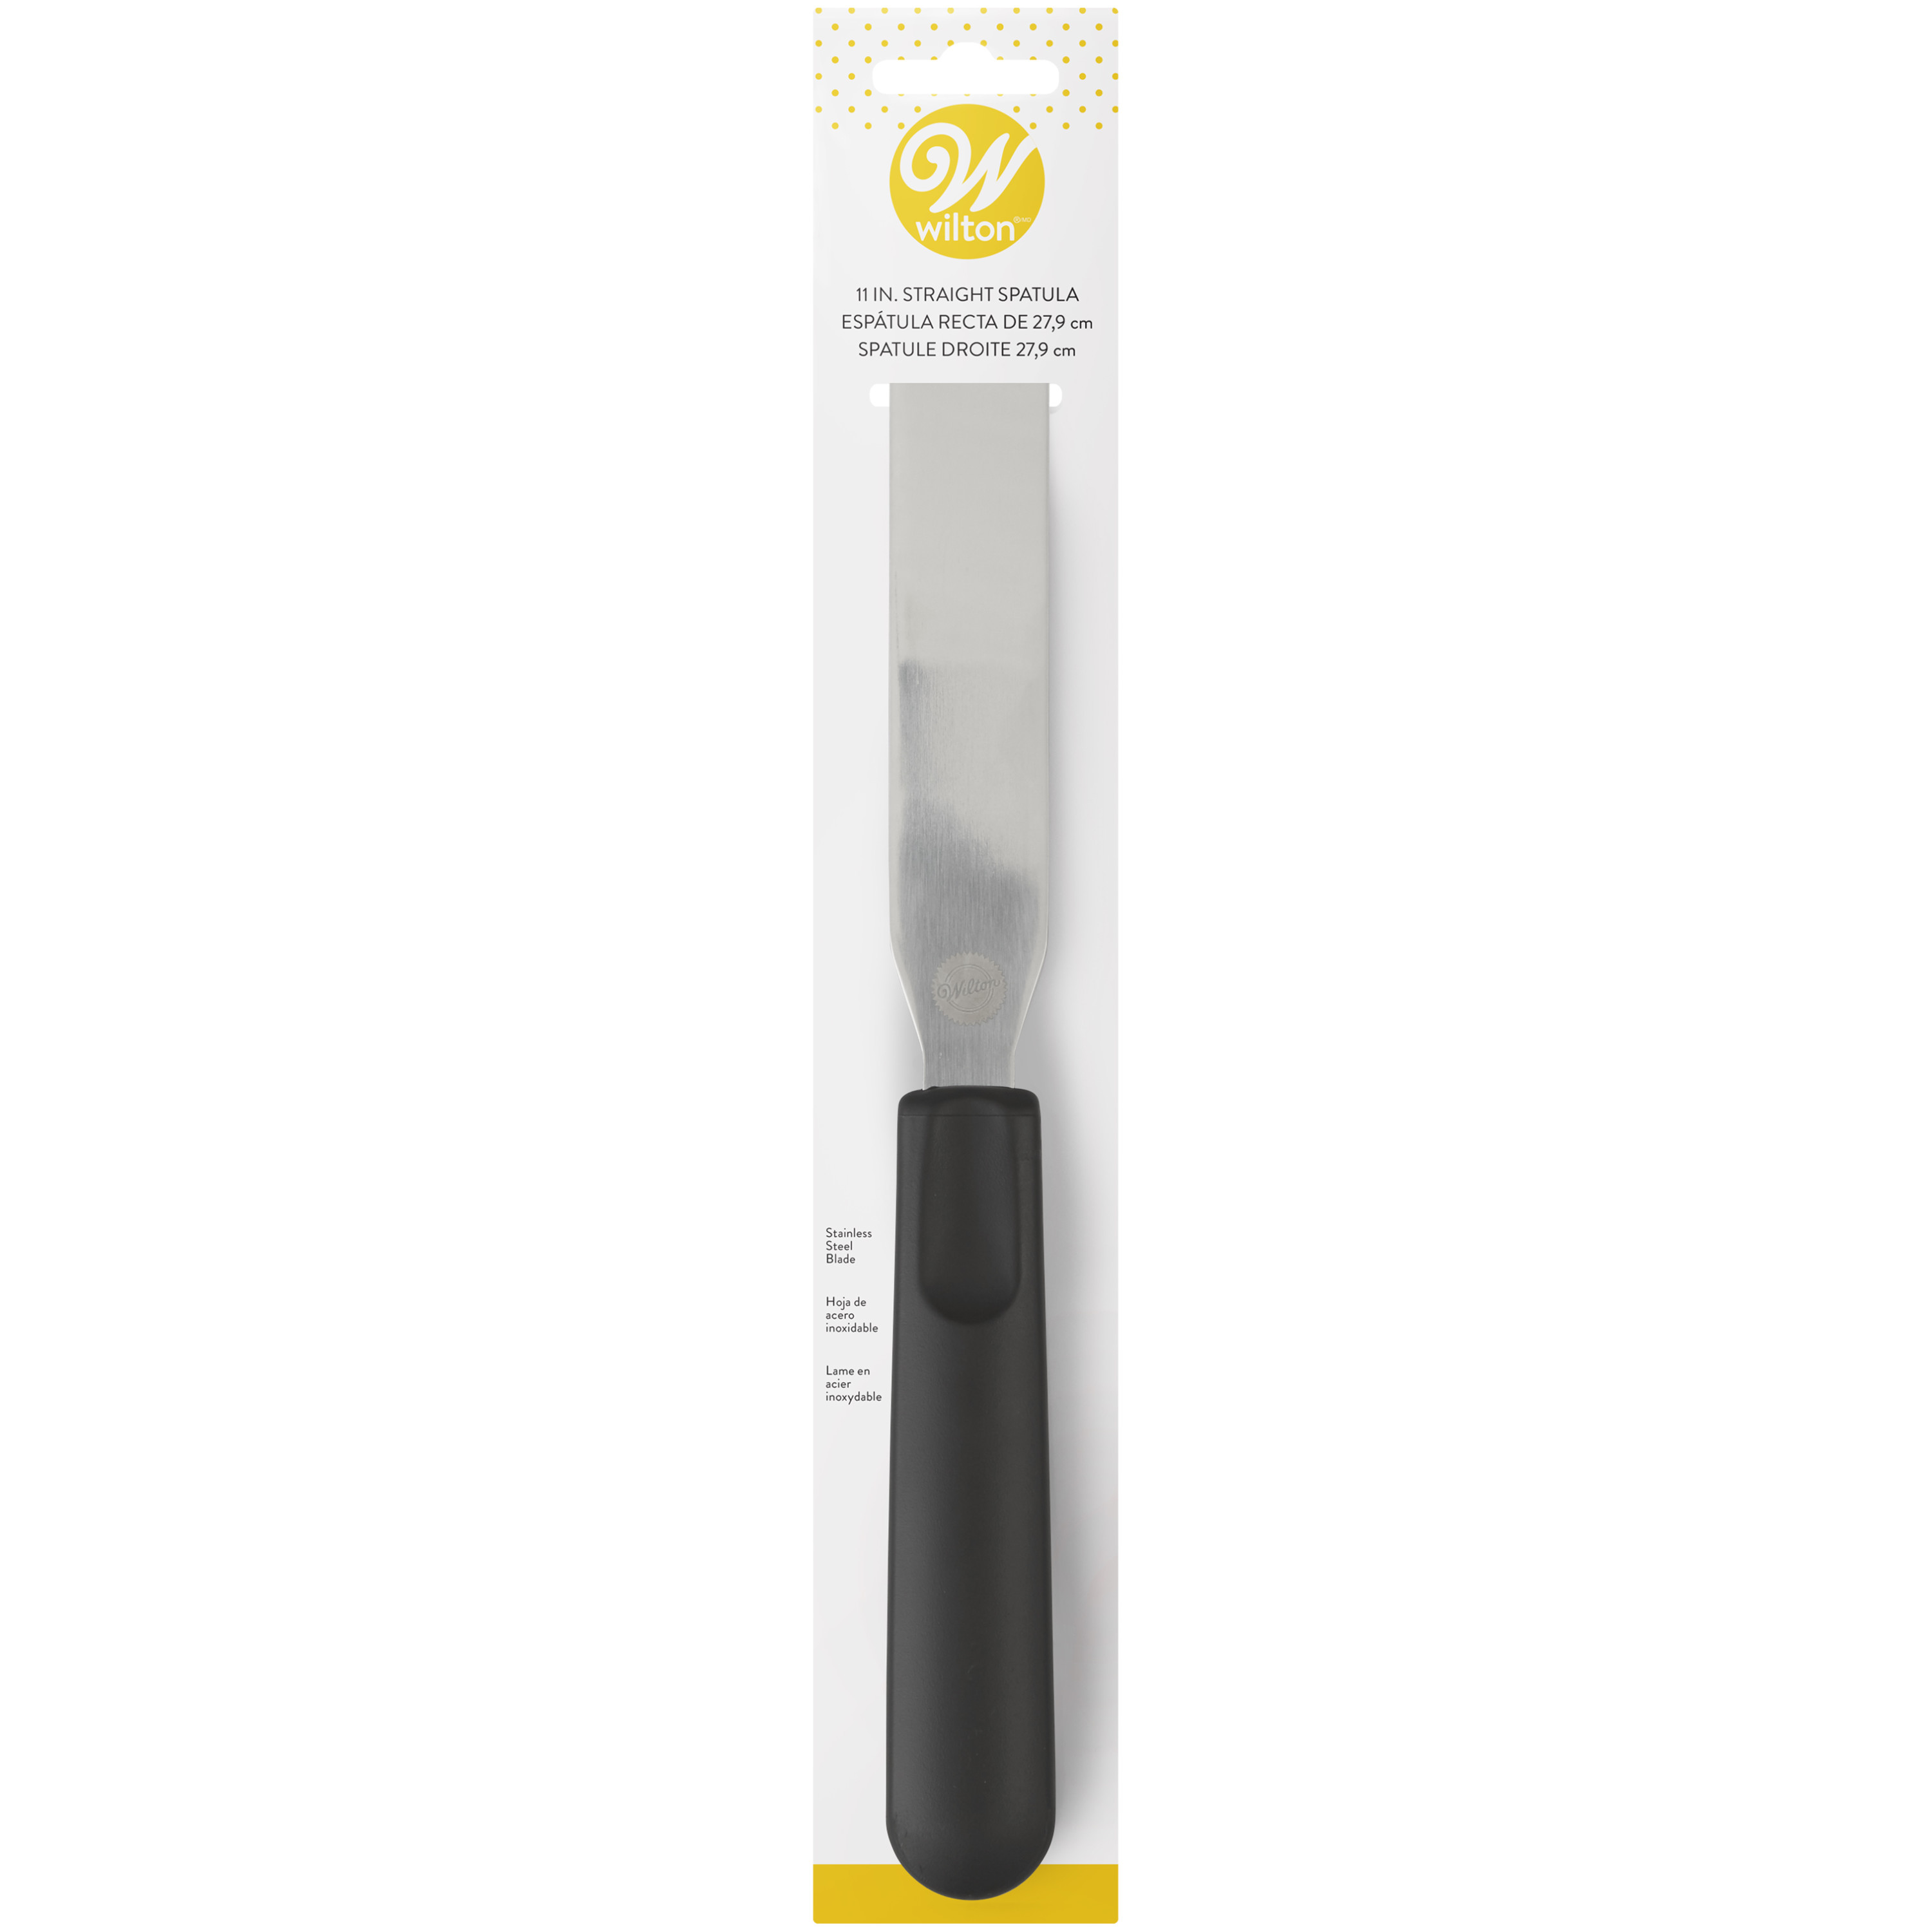 Wilton Straight Spatula, Stainless Steel Blade, Plastic Handle, 11 inch - image 4 of 7